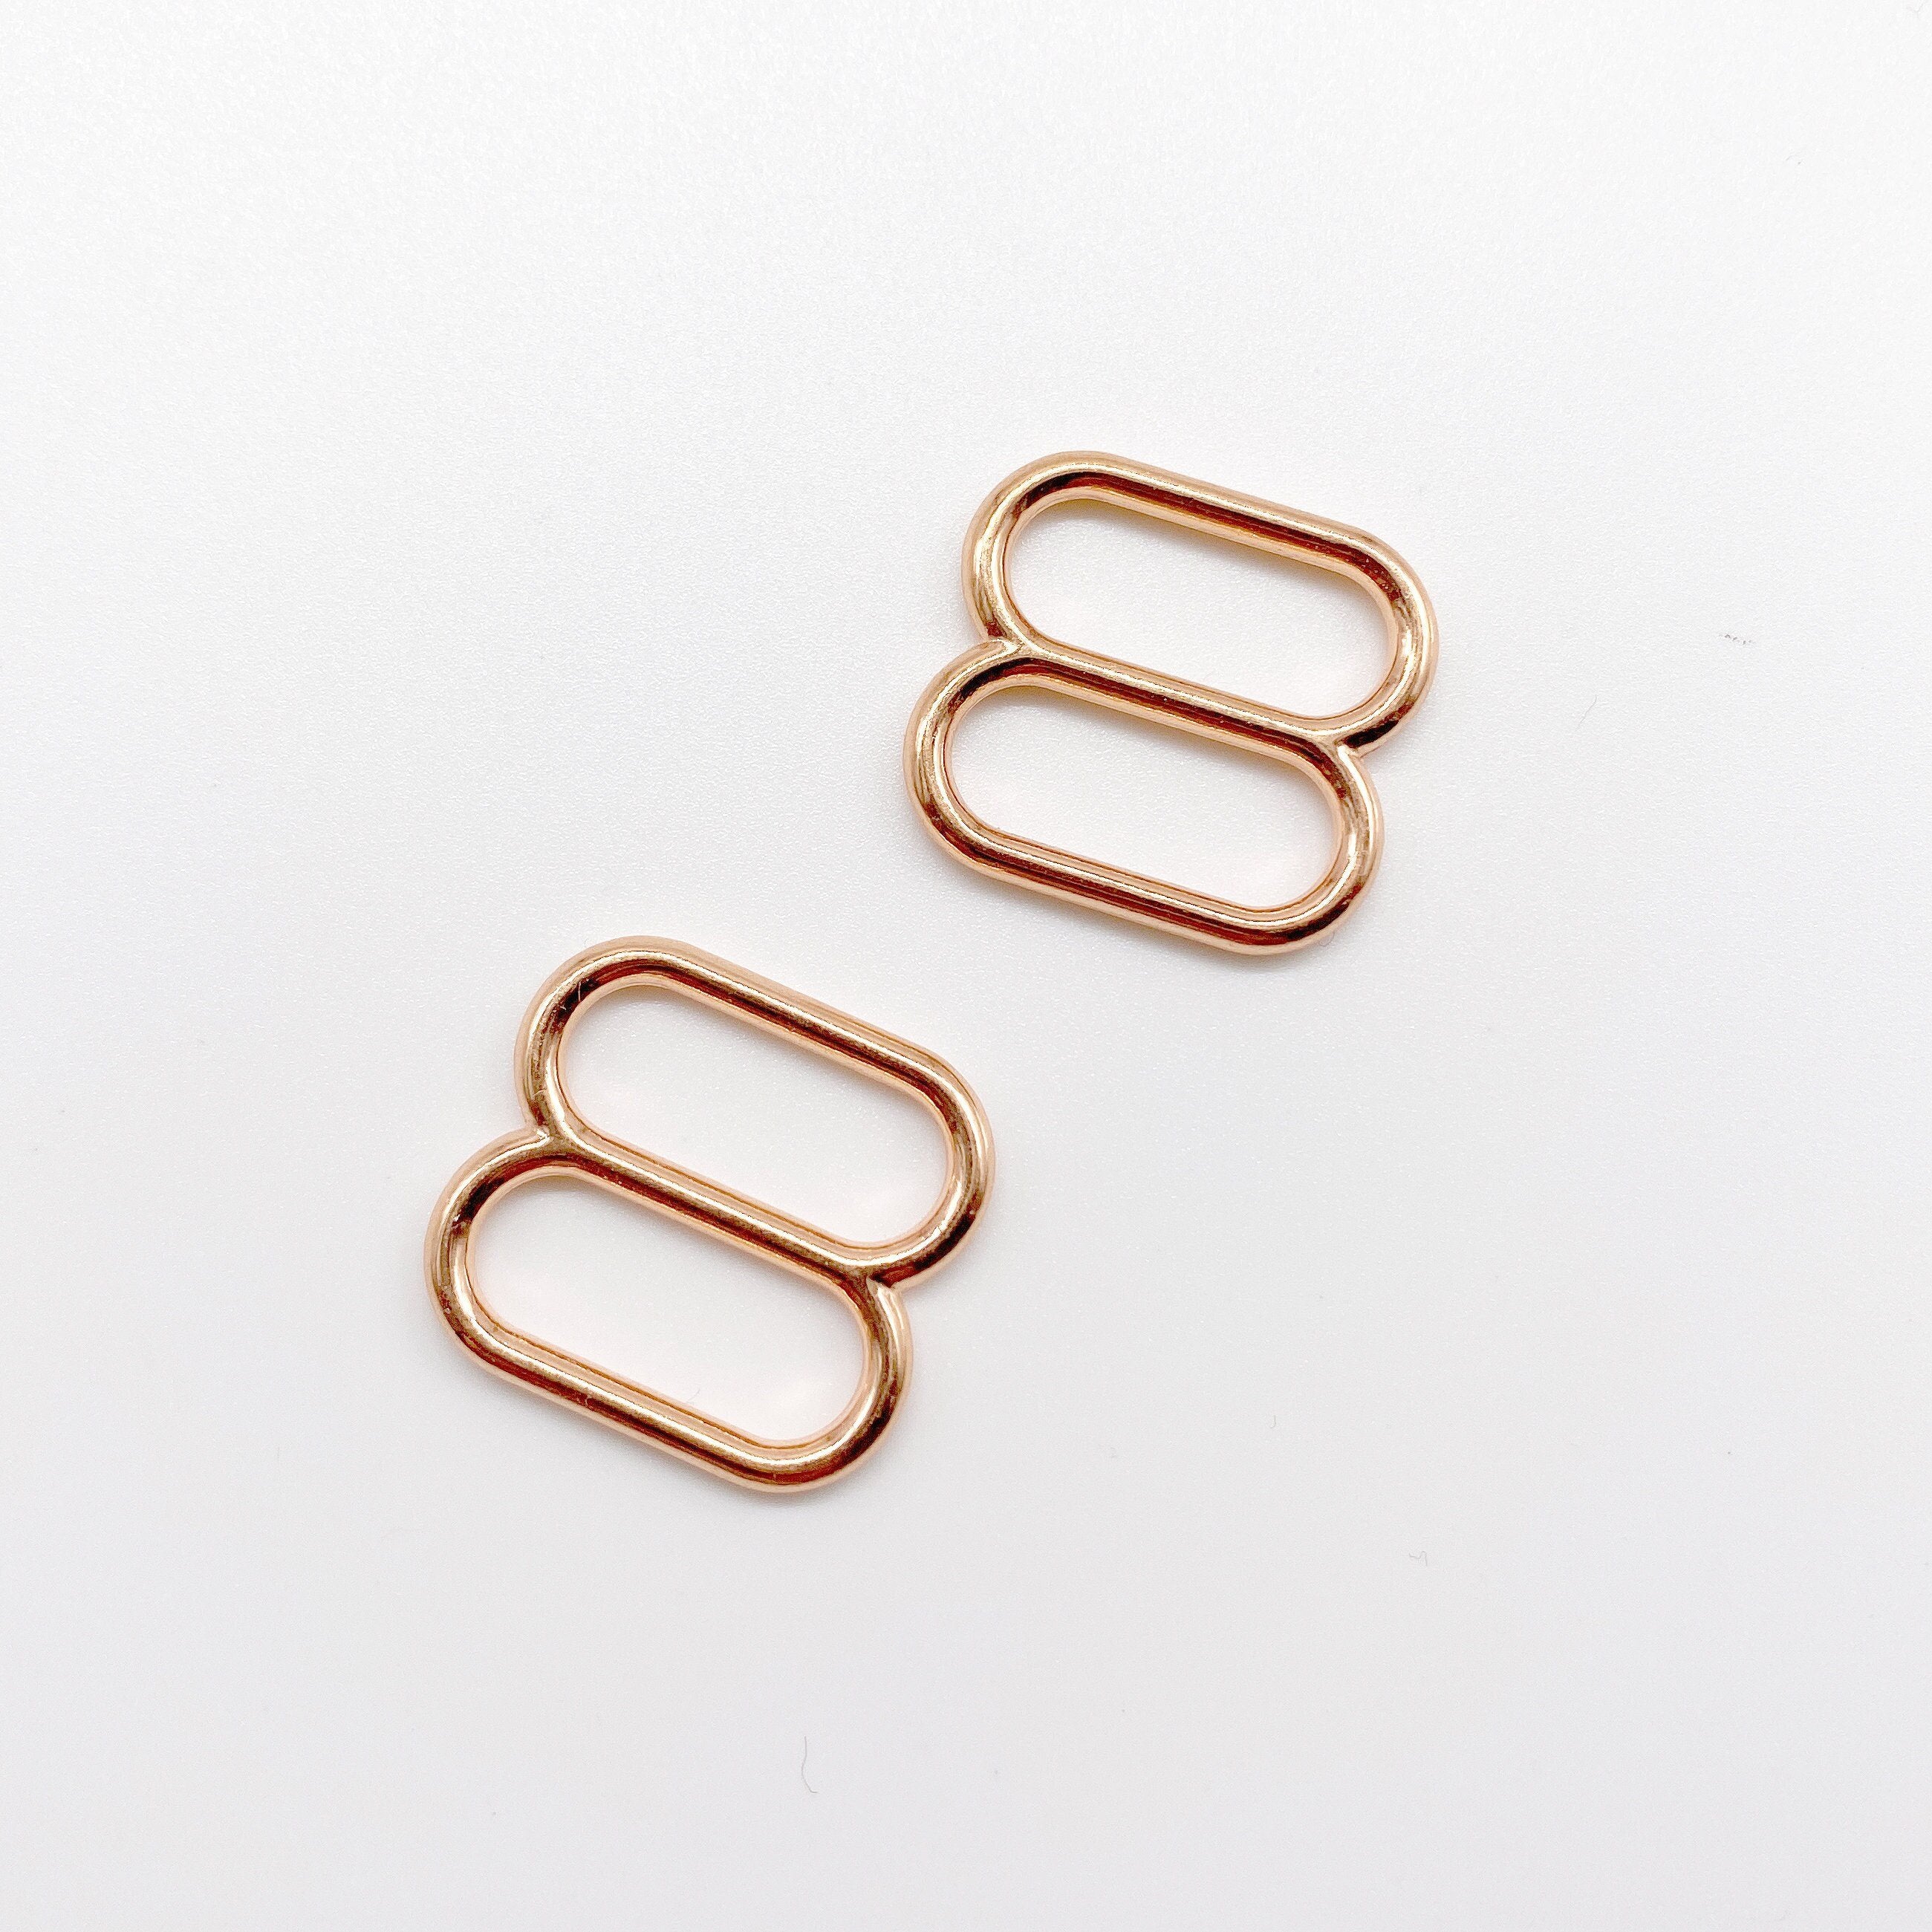 Set of 2 Thicker Rings OR 2 Tall Thick Sliders in Rose Gold for Swimwear or Bra making- 3/8"/10mm, 1/2"/12mm, 5/8"/15mm-Stitch Love Studio